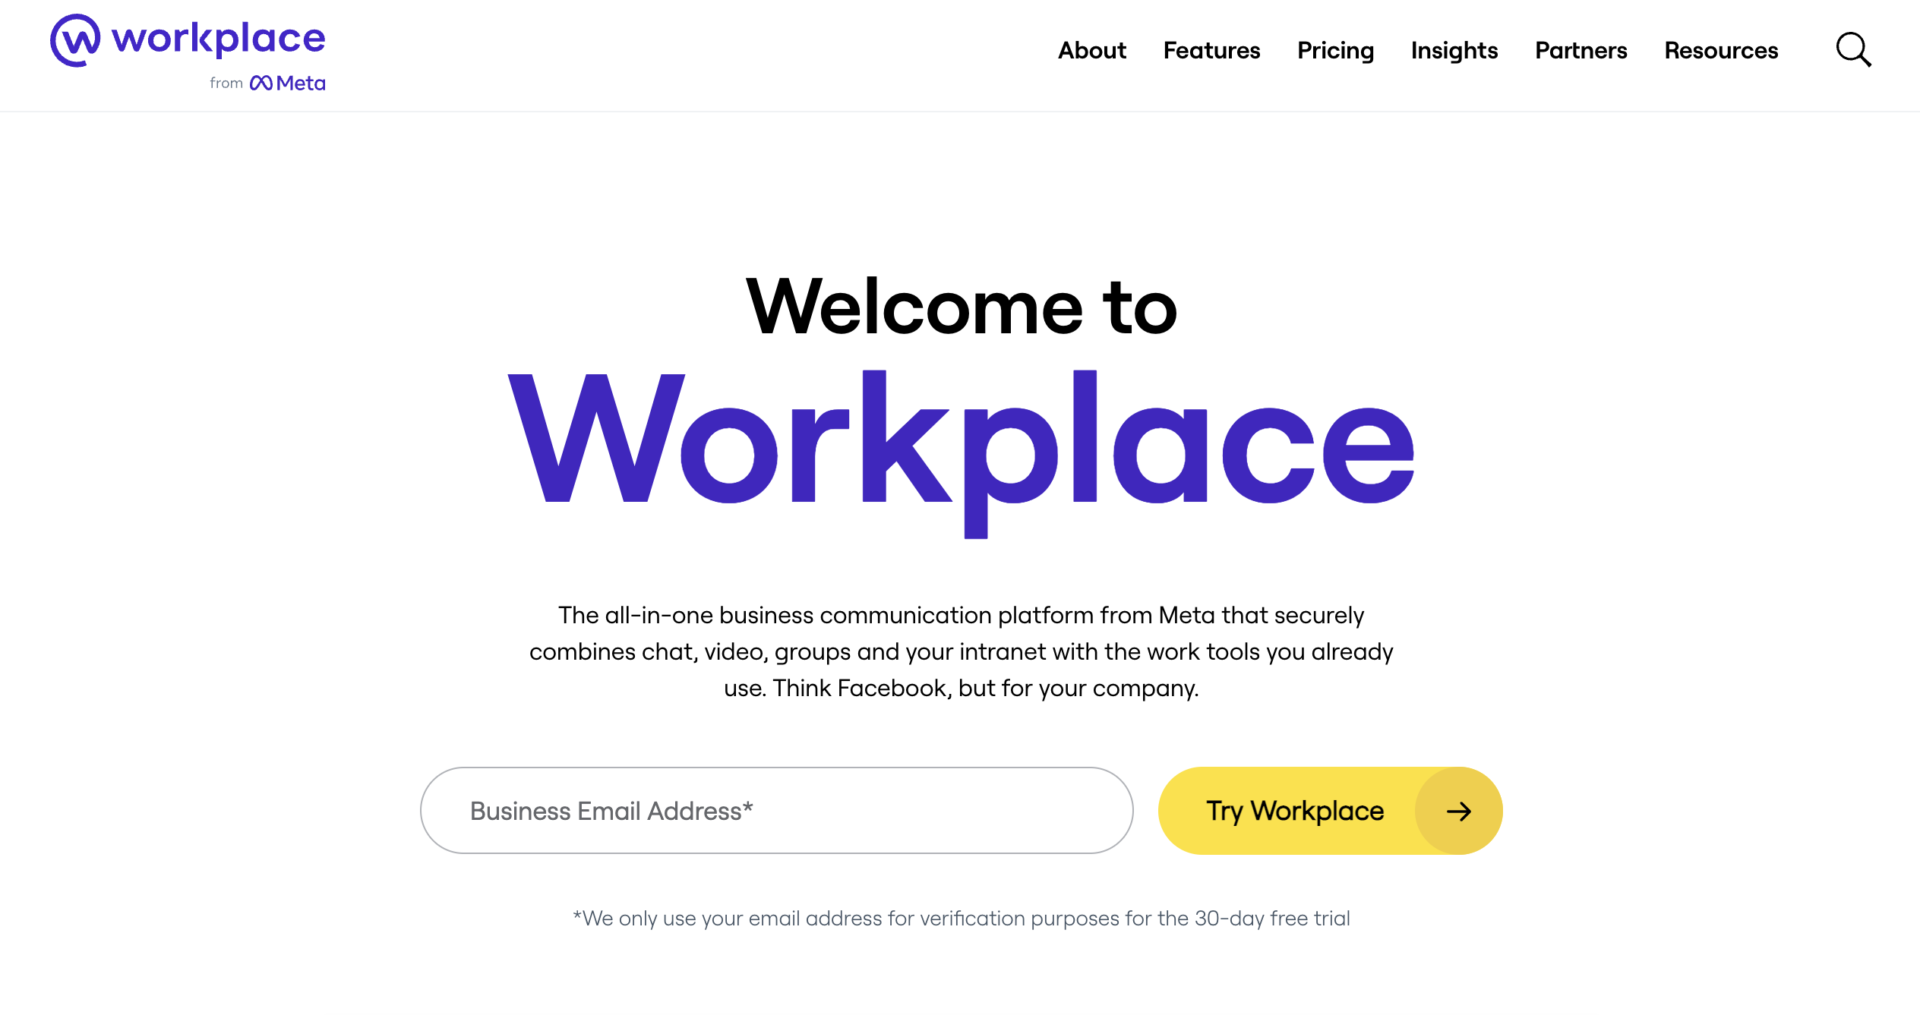 Top page of Workplace from Meta